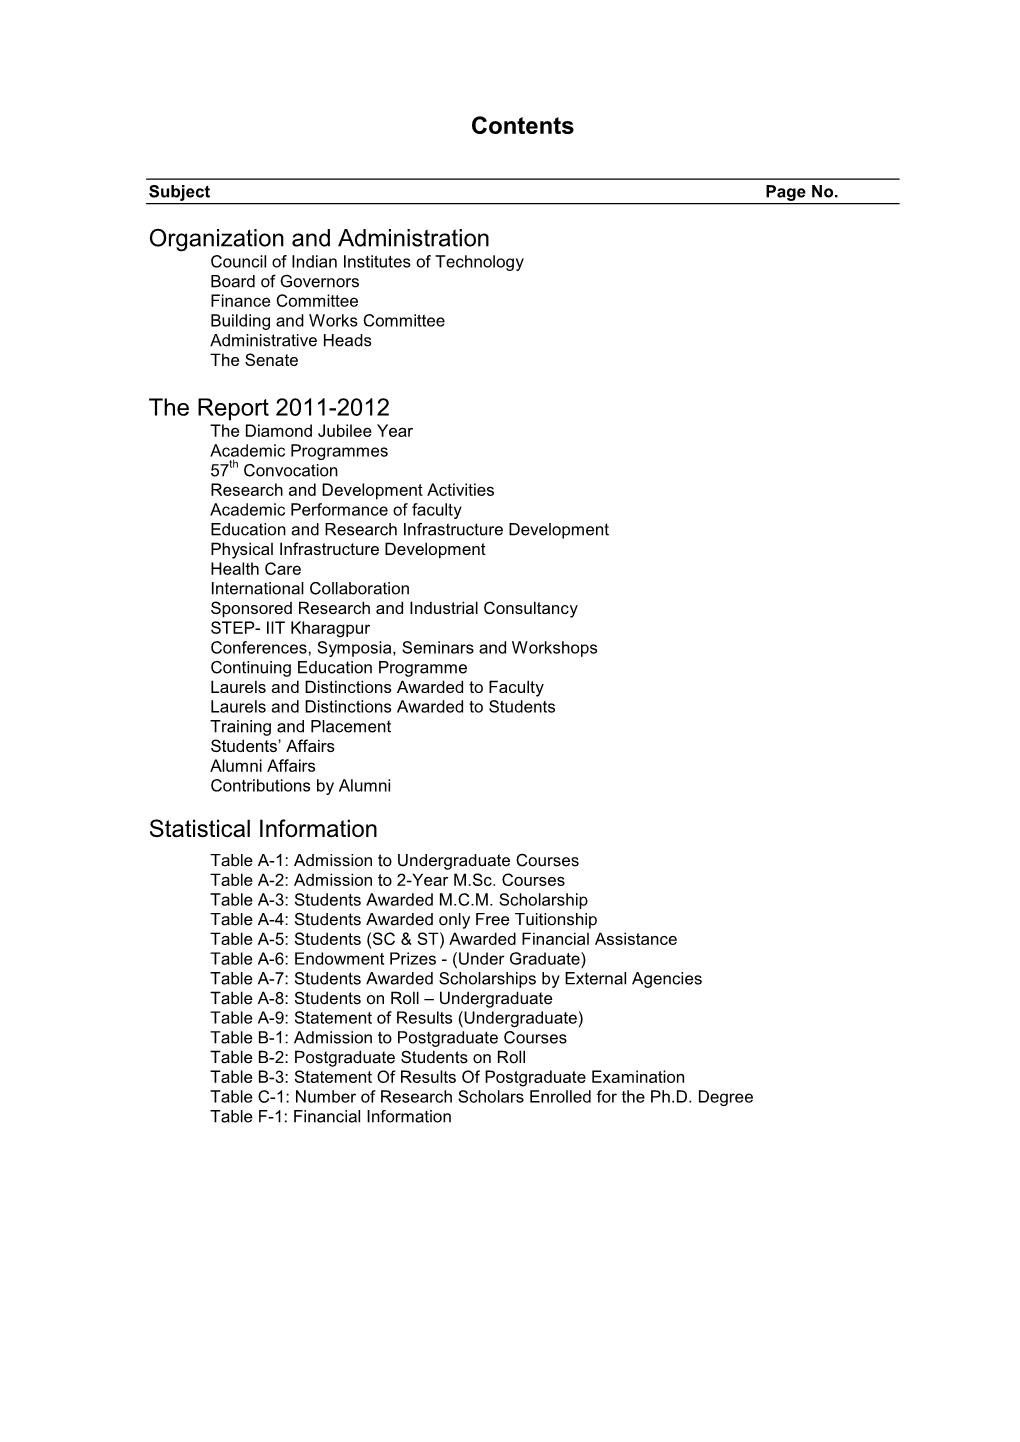 Contents Organization and Administration the Report 2011-2012 Statistical Information